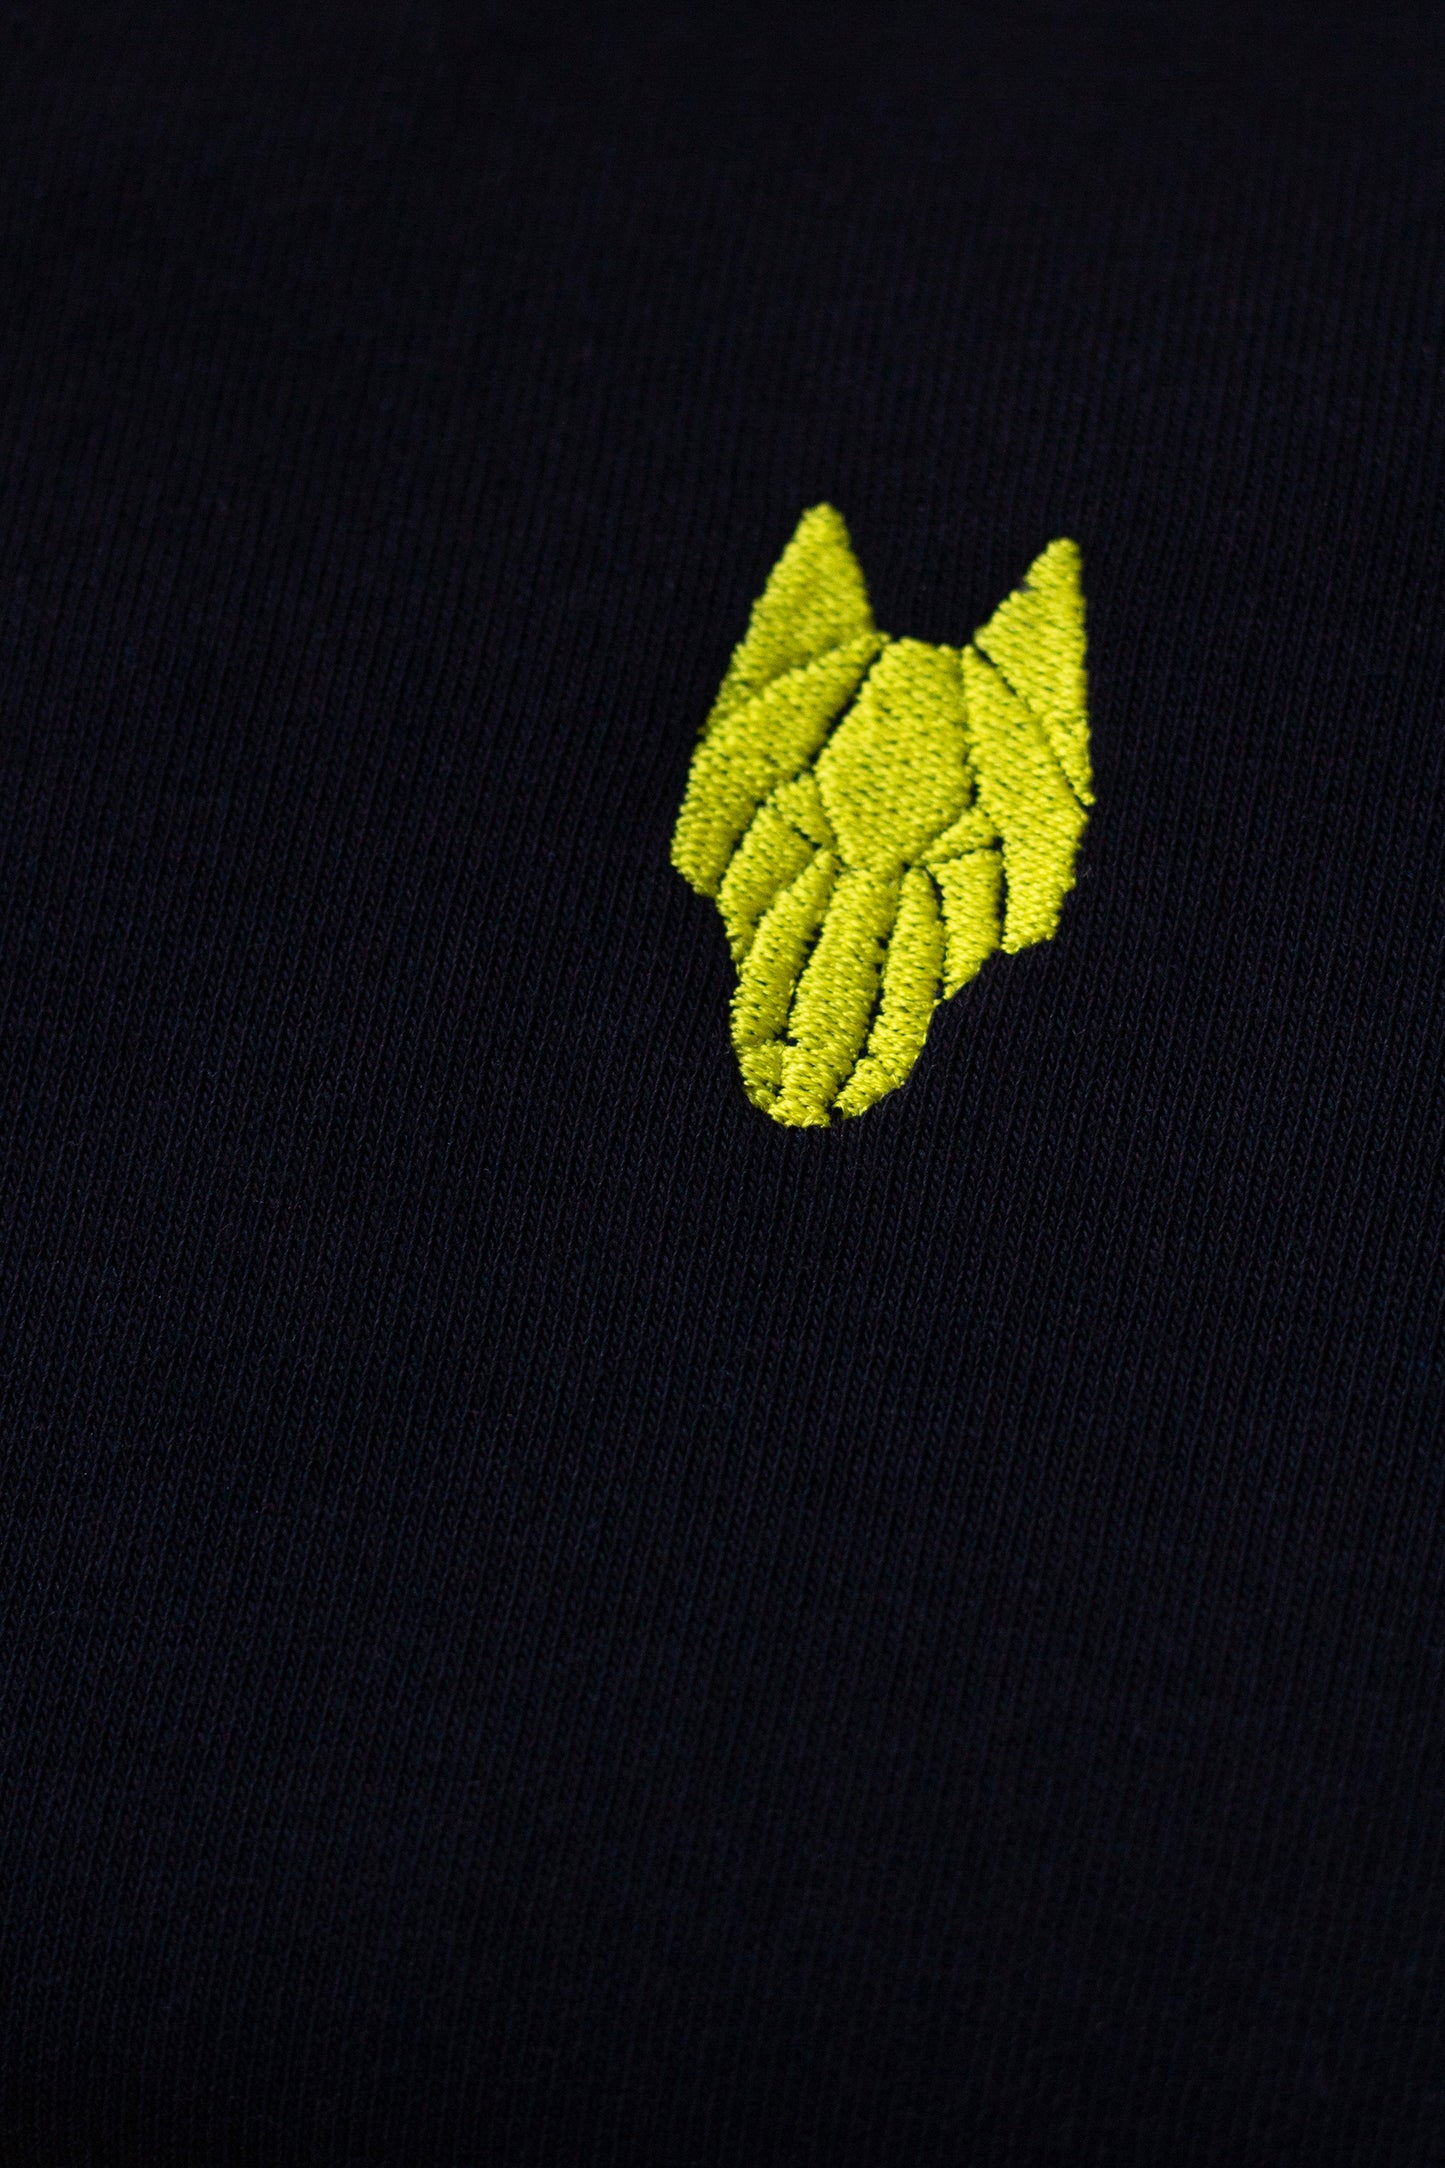 Kid's One Wolf knitted sweater black, yellow logo